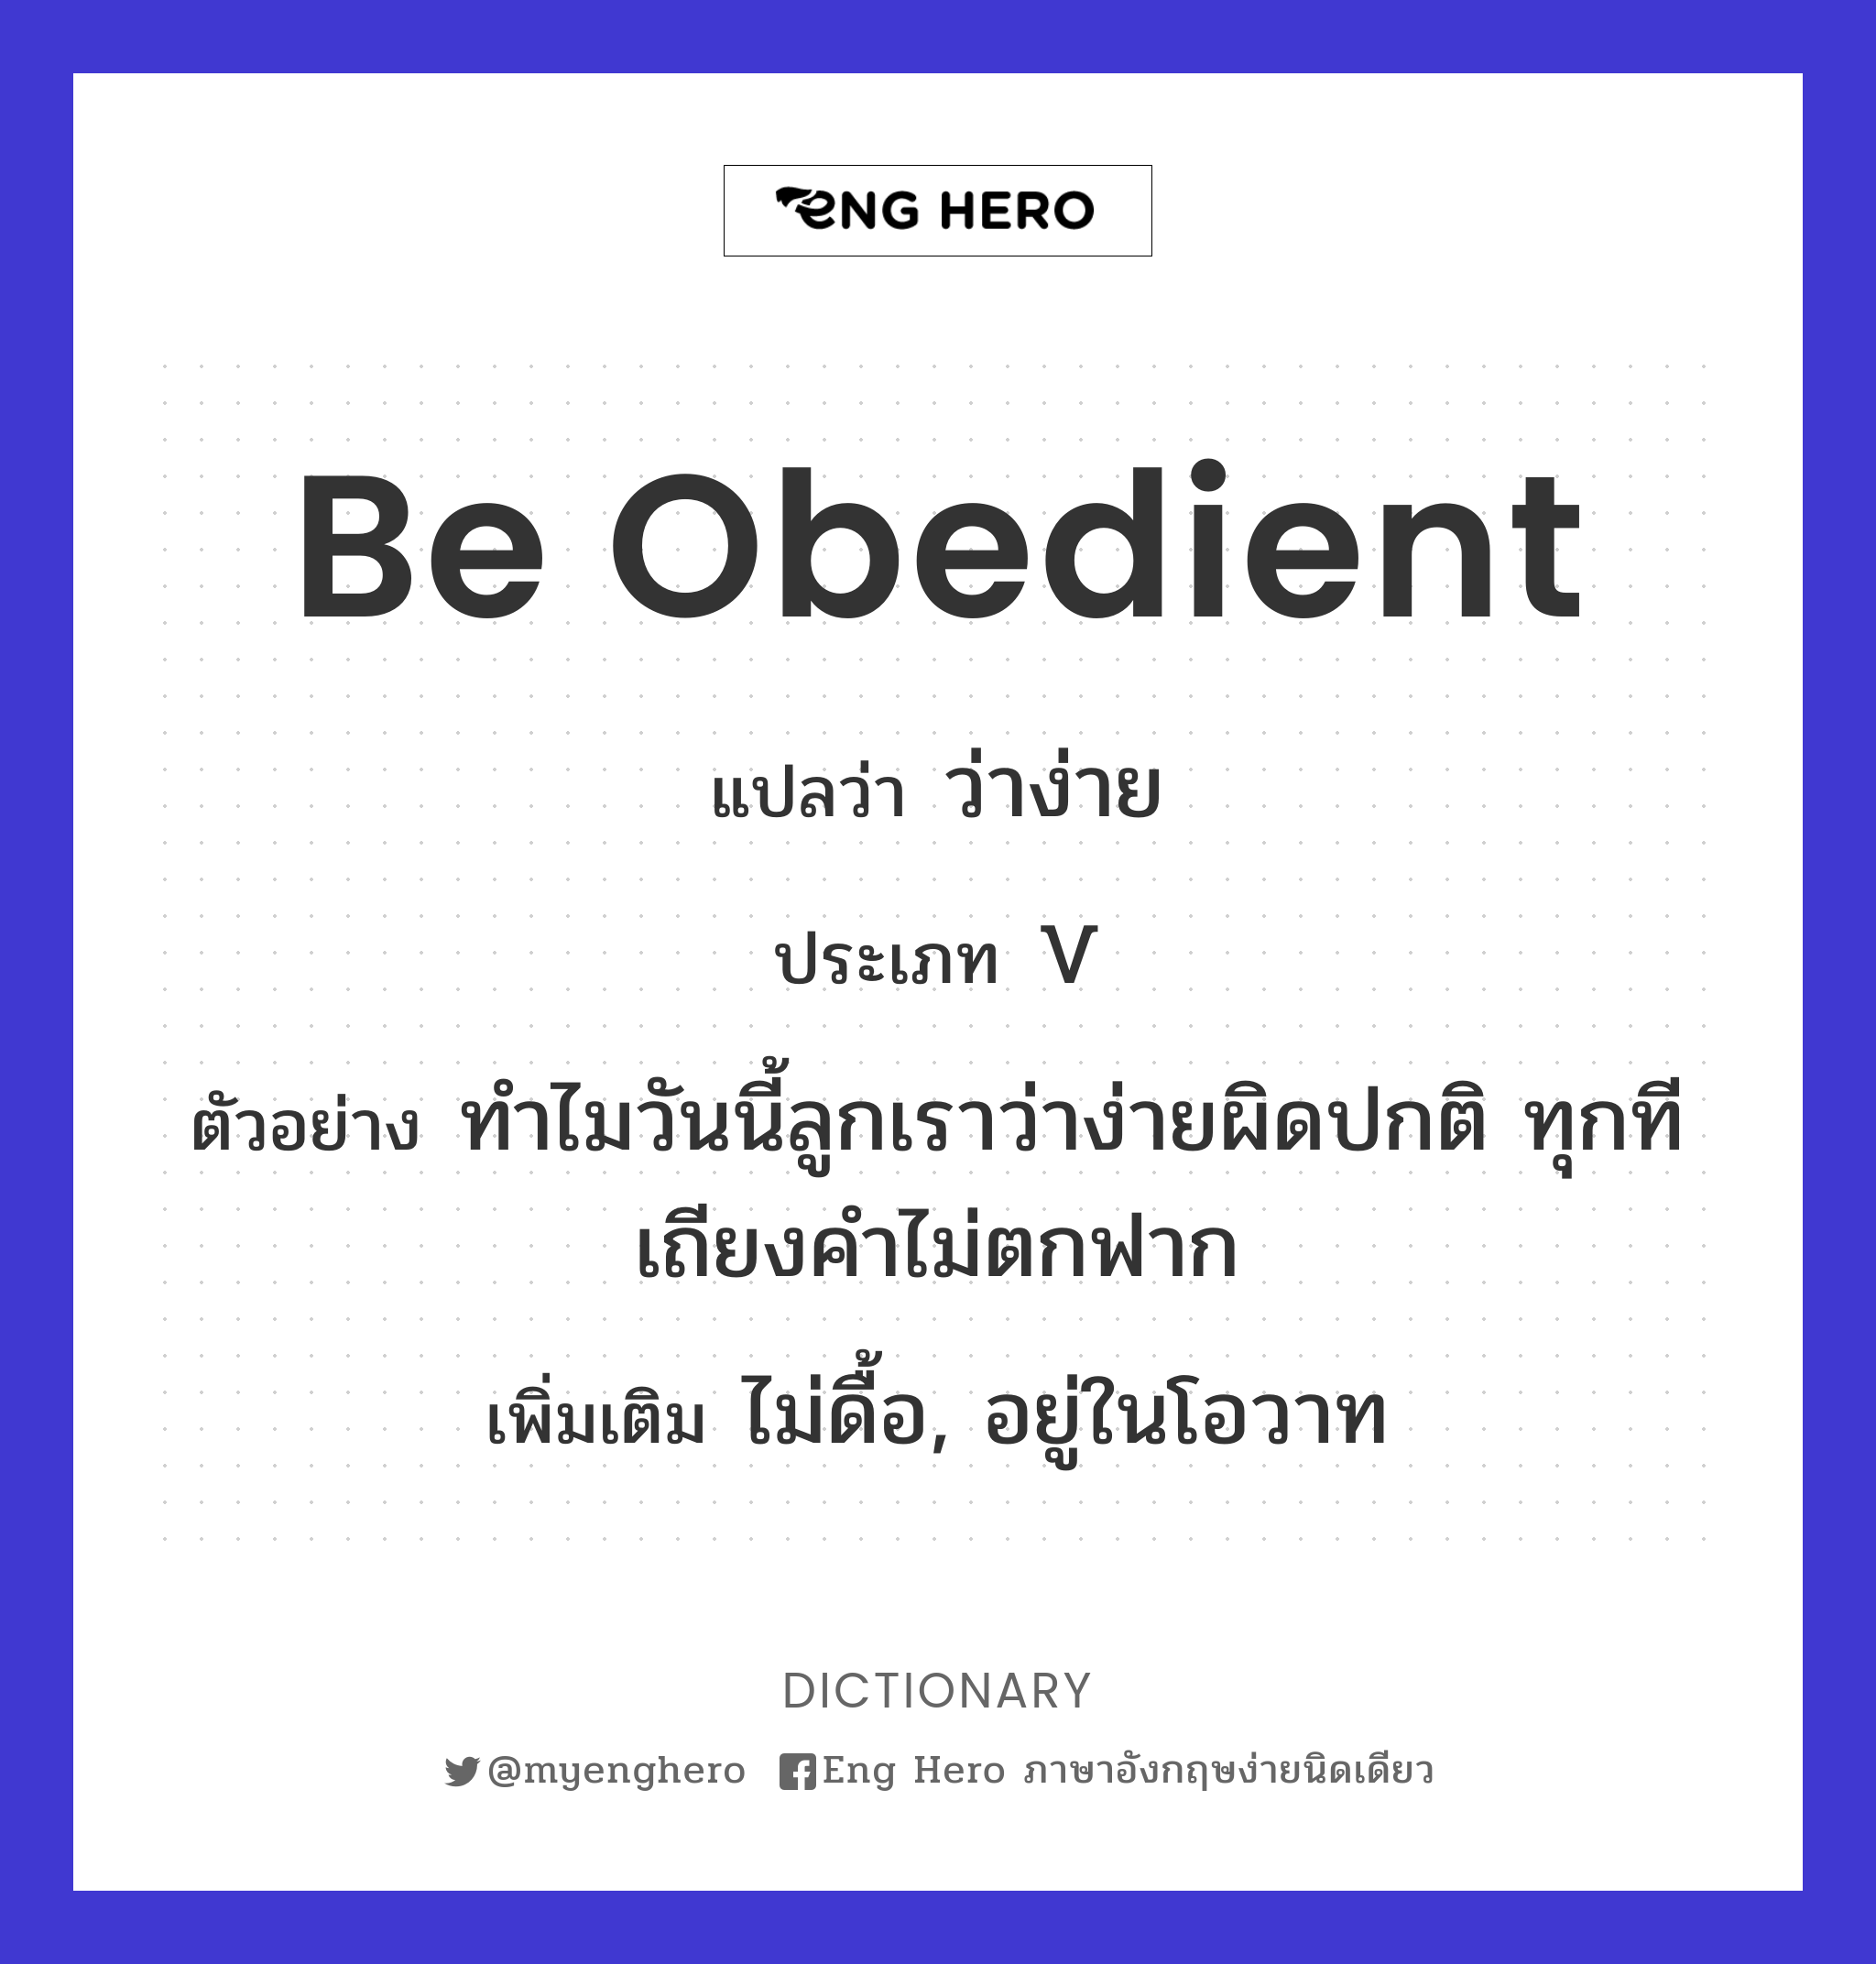 be obedient